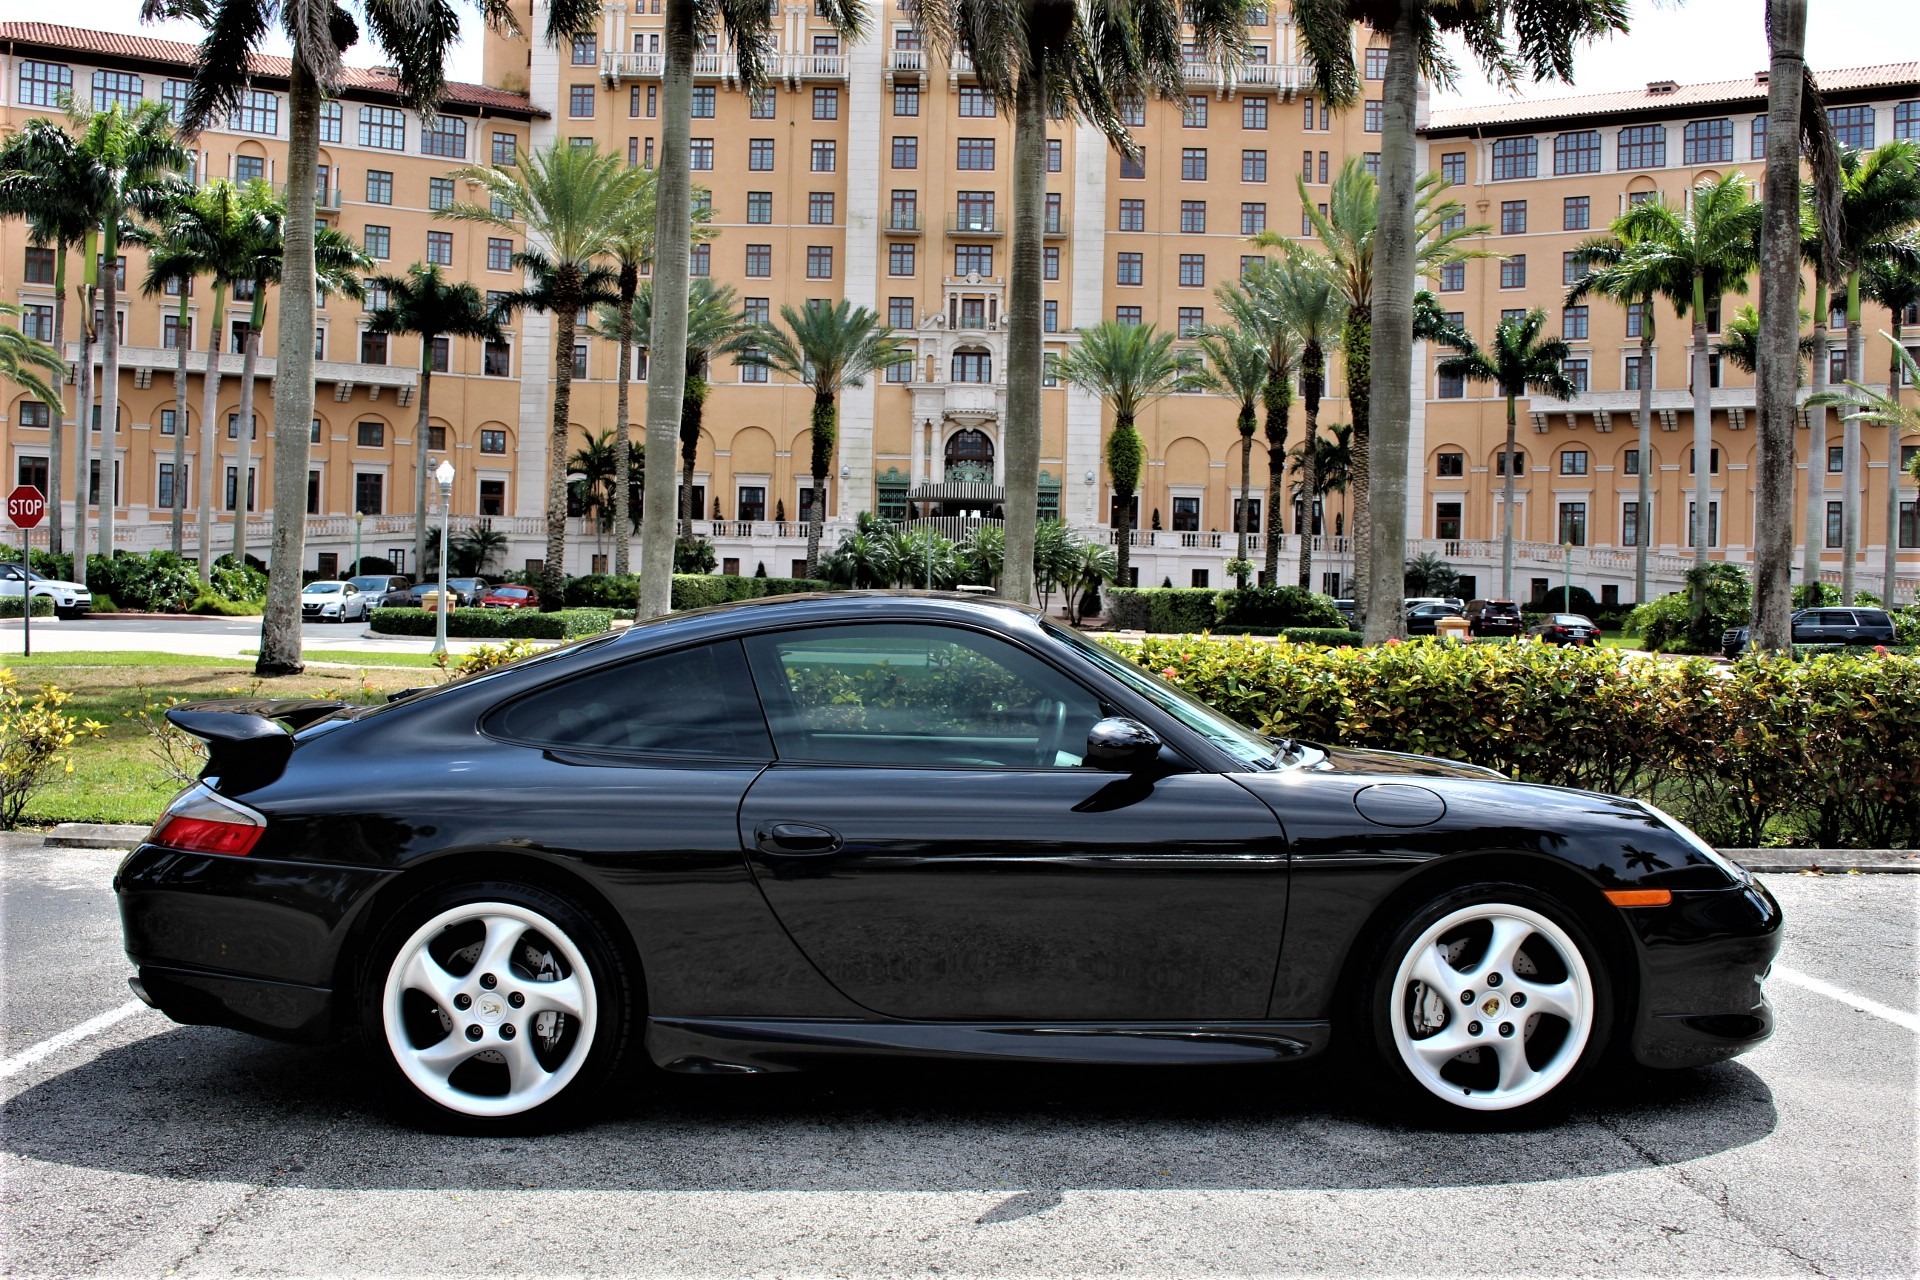 Used 2001 Porsche 911 Carrera 4 For Sale ($32,850) | The Gables Sports Cars  Stock #633212